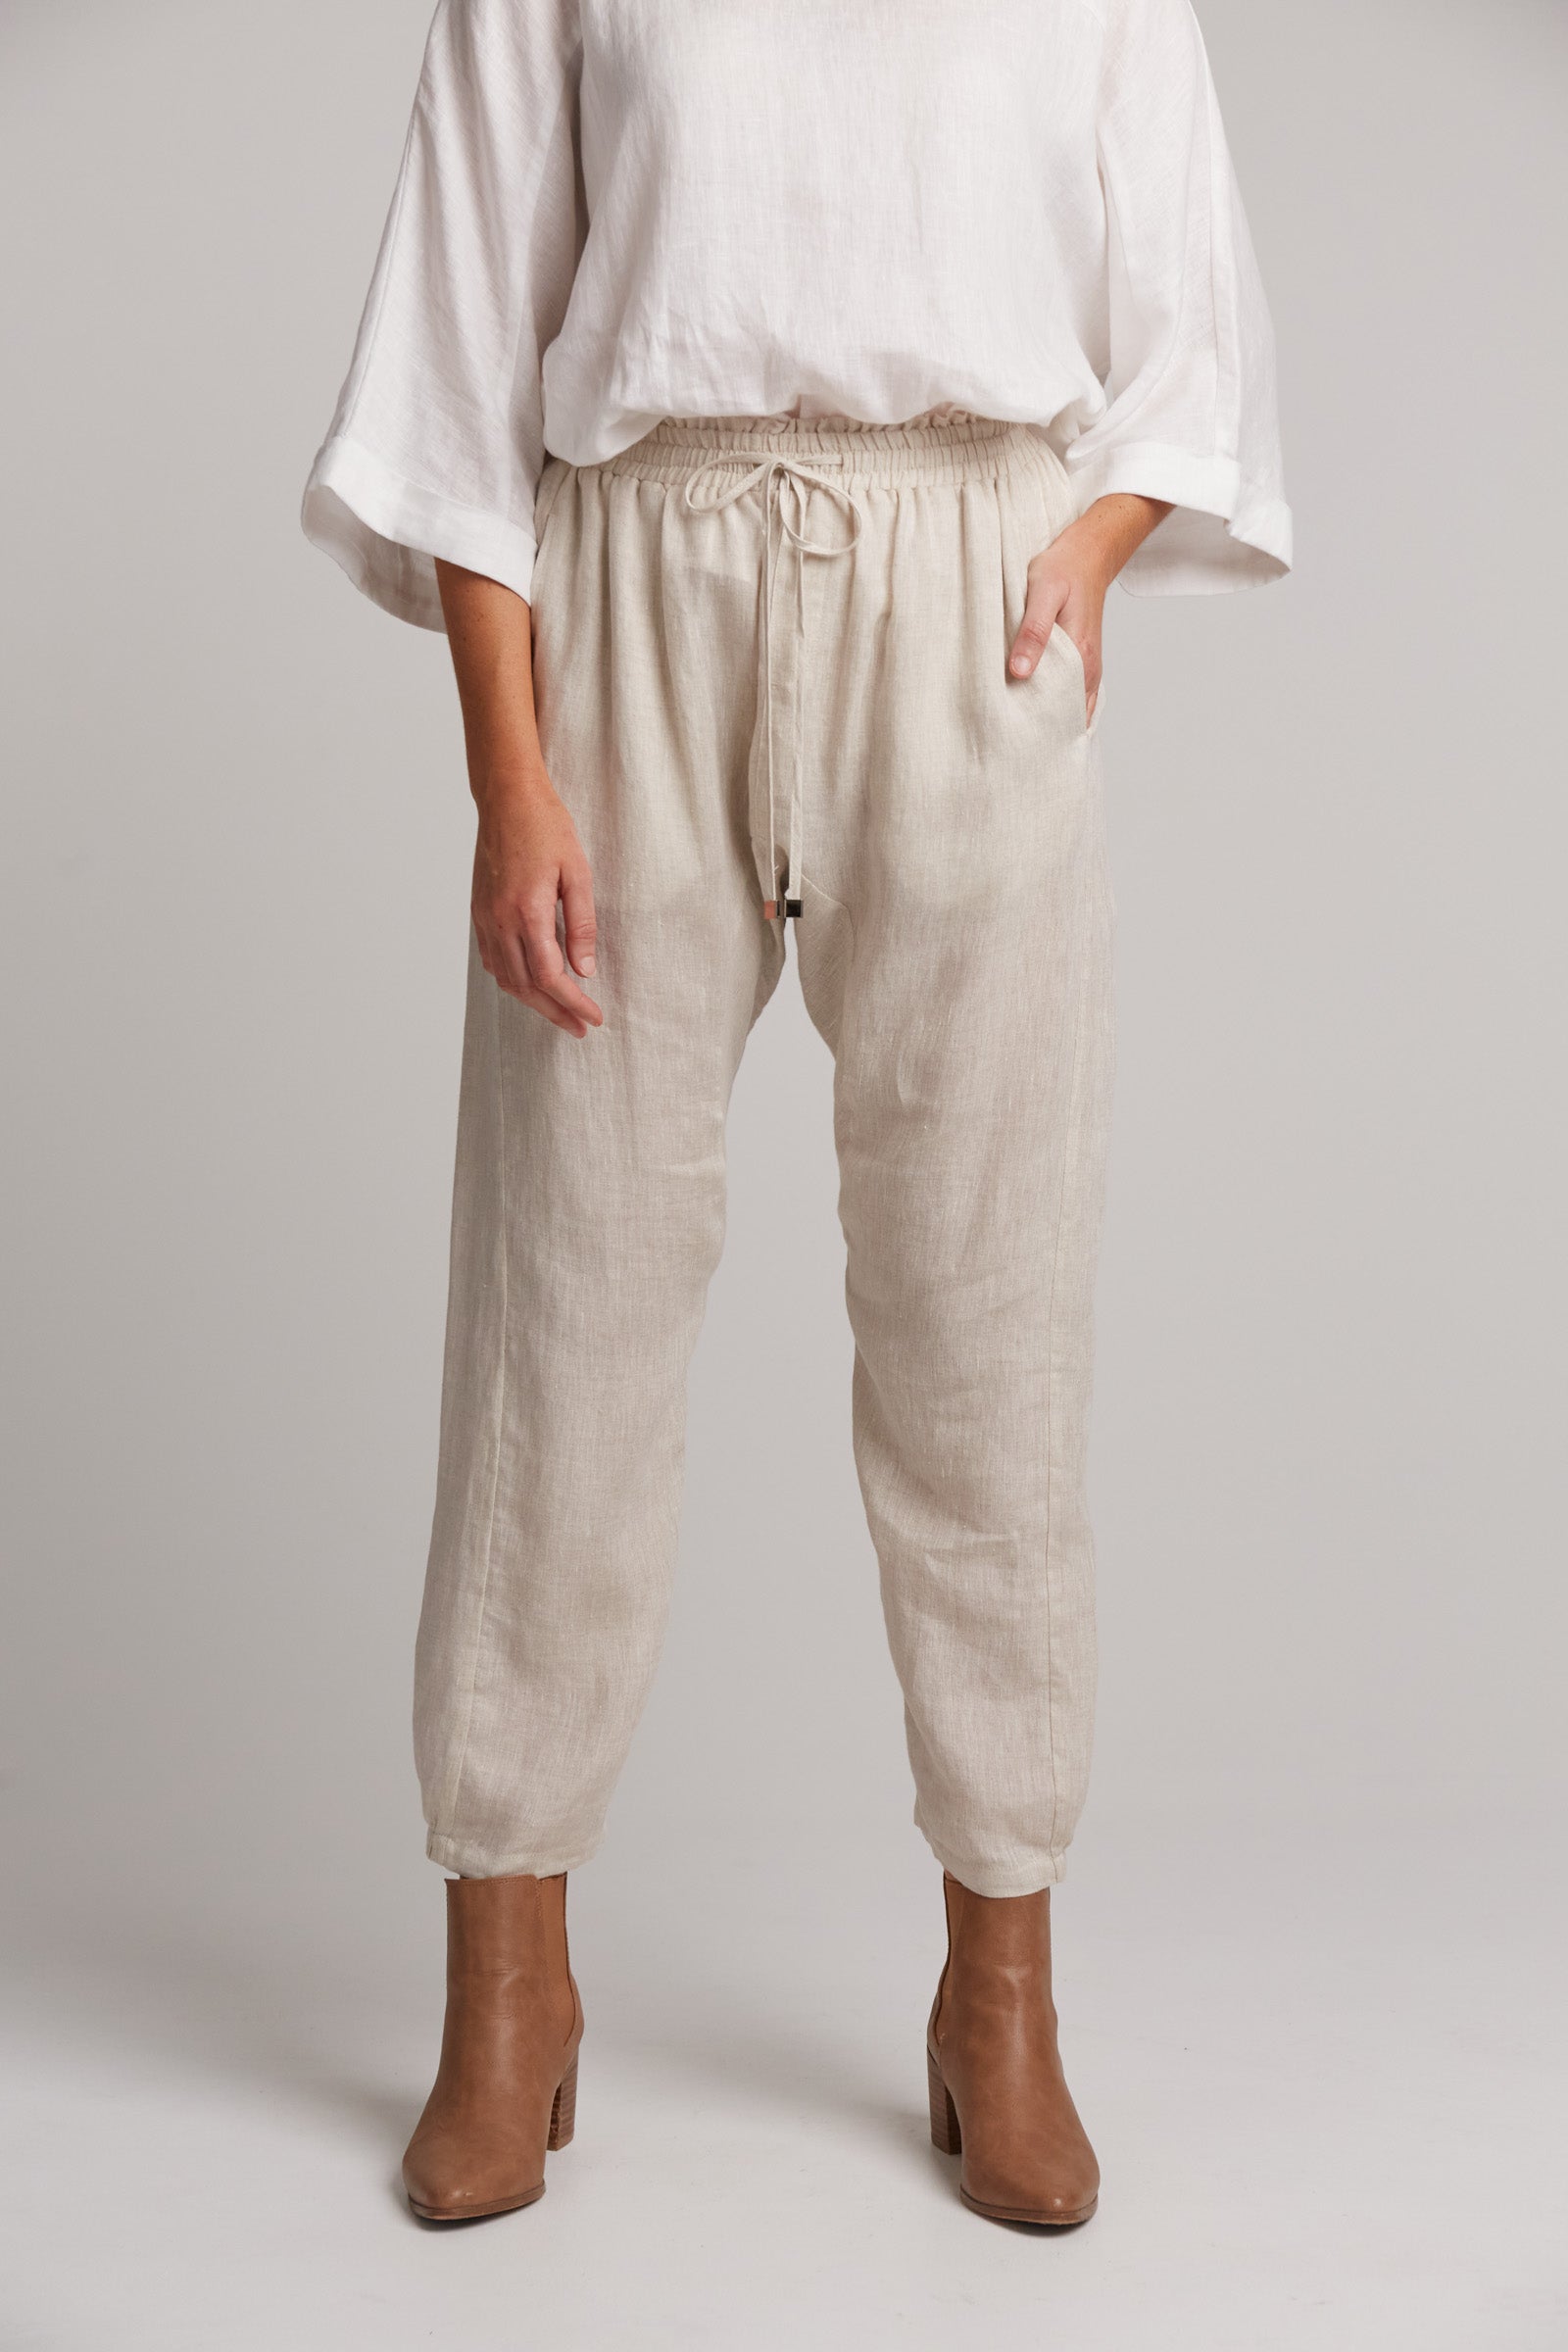 Studio Relaxed Pant - Tusk - eb&ive Clothing - Pant Relaxed Linen